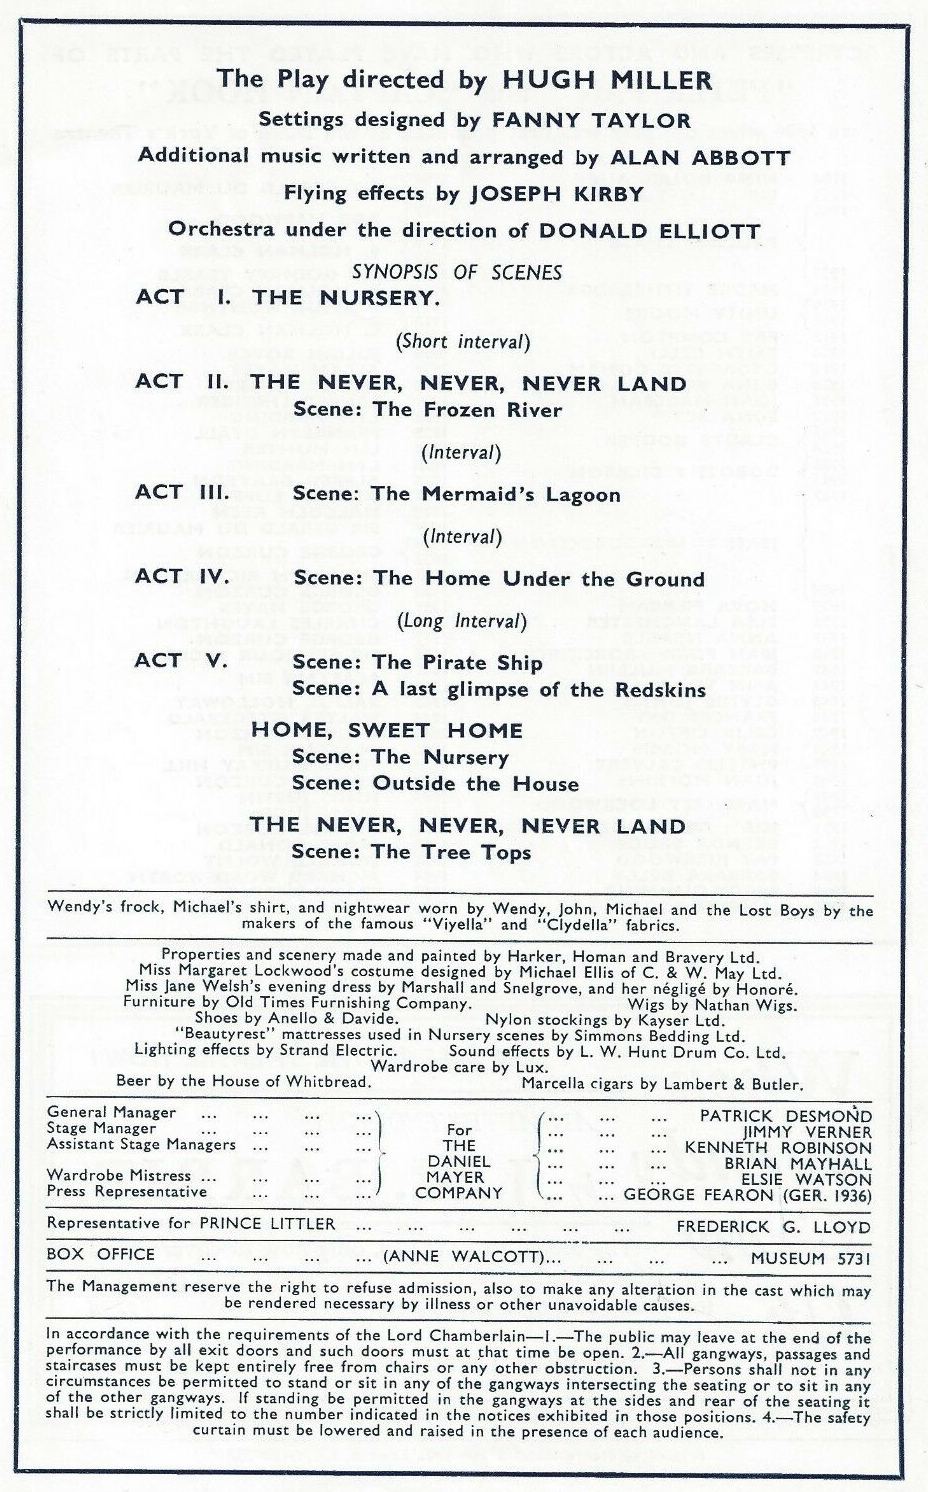 Programme from the Scala Theatre, 1957 production of Peter Pan (3)